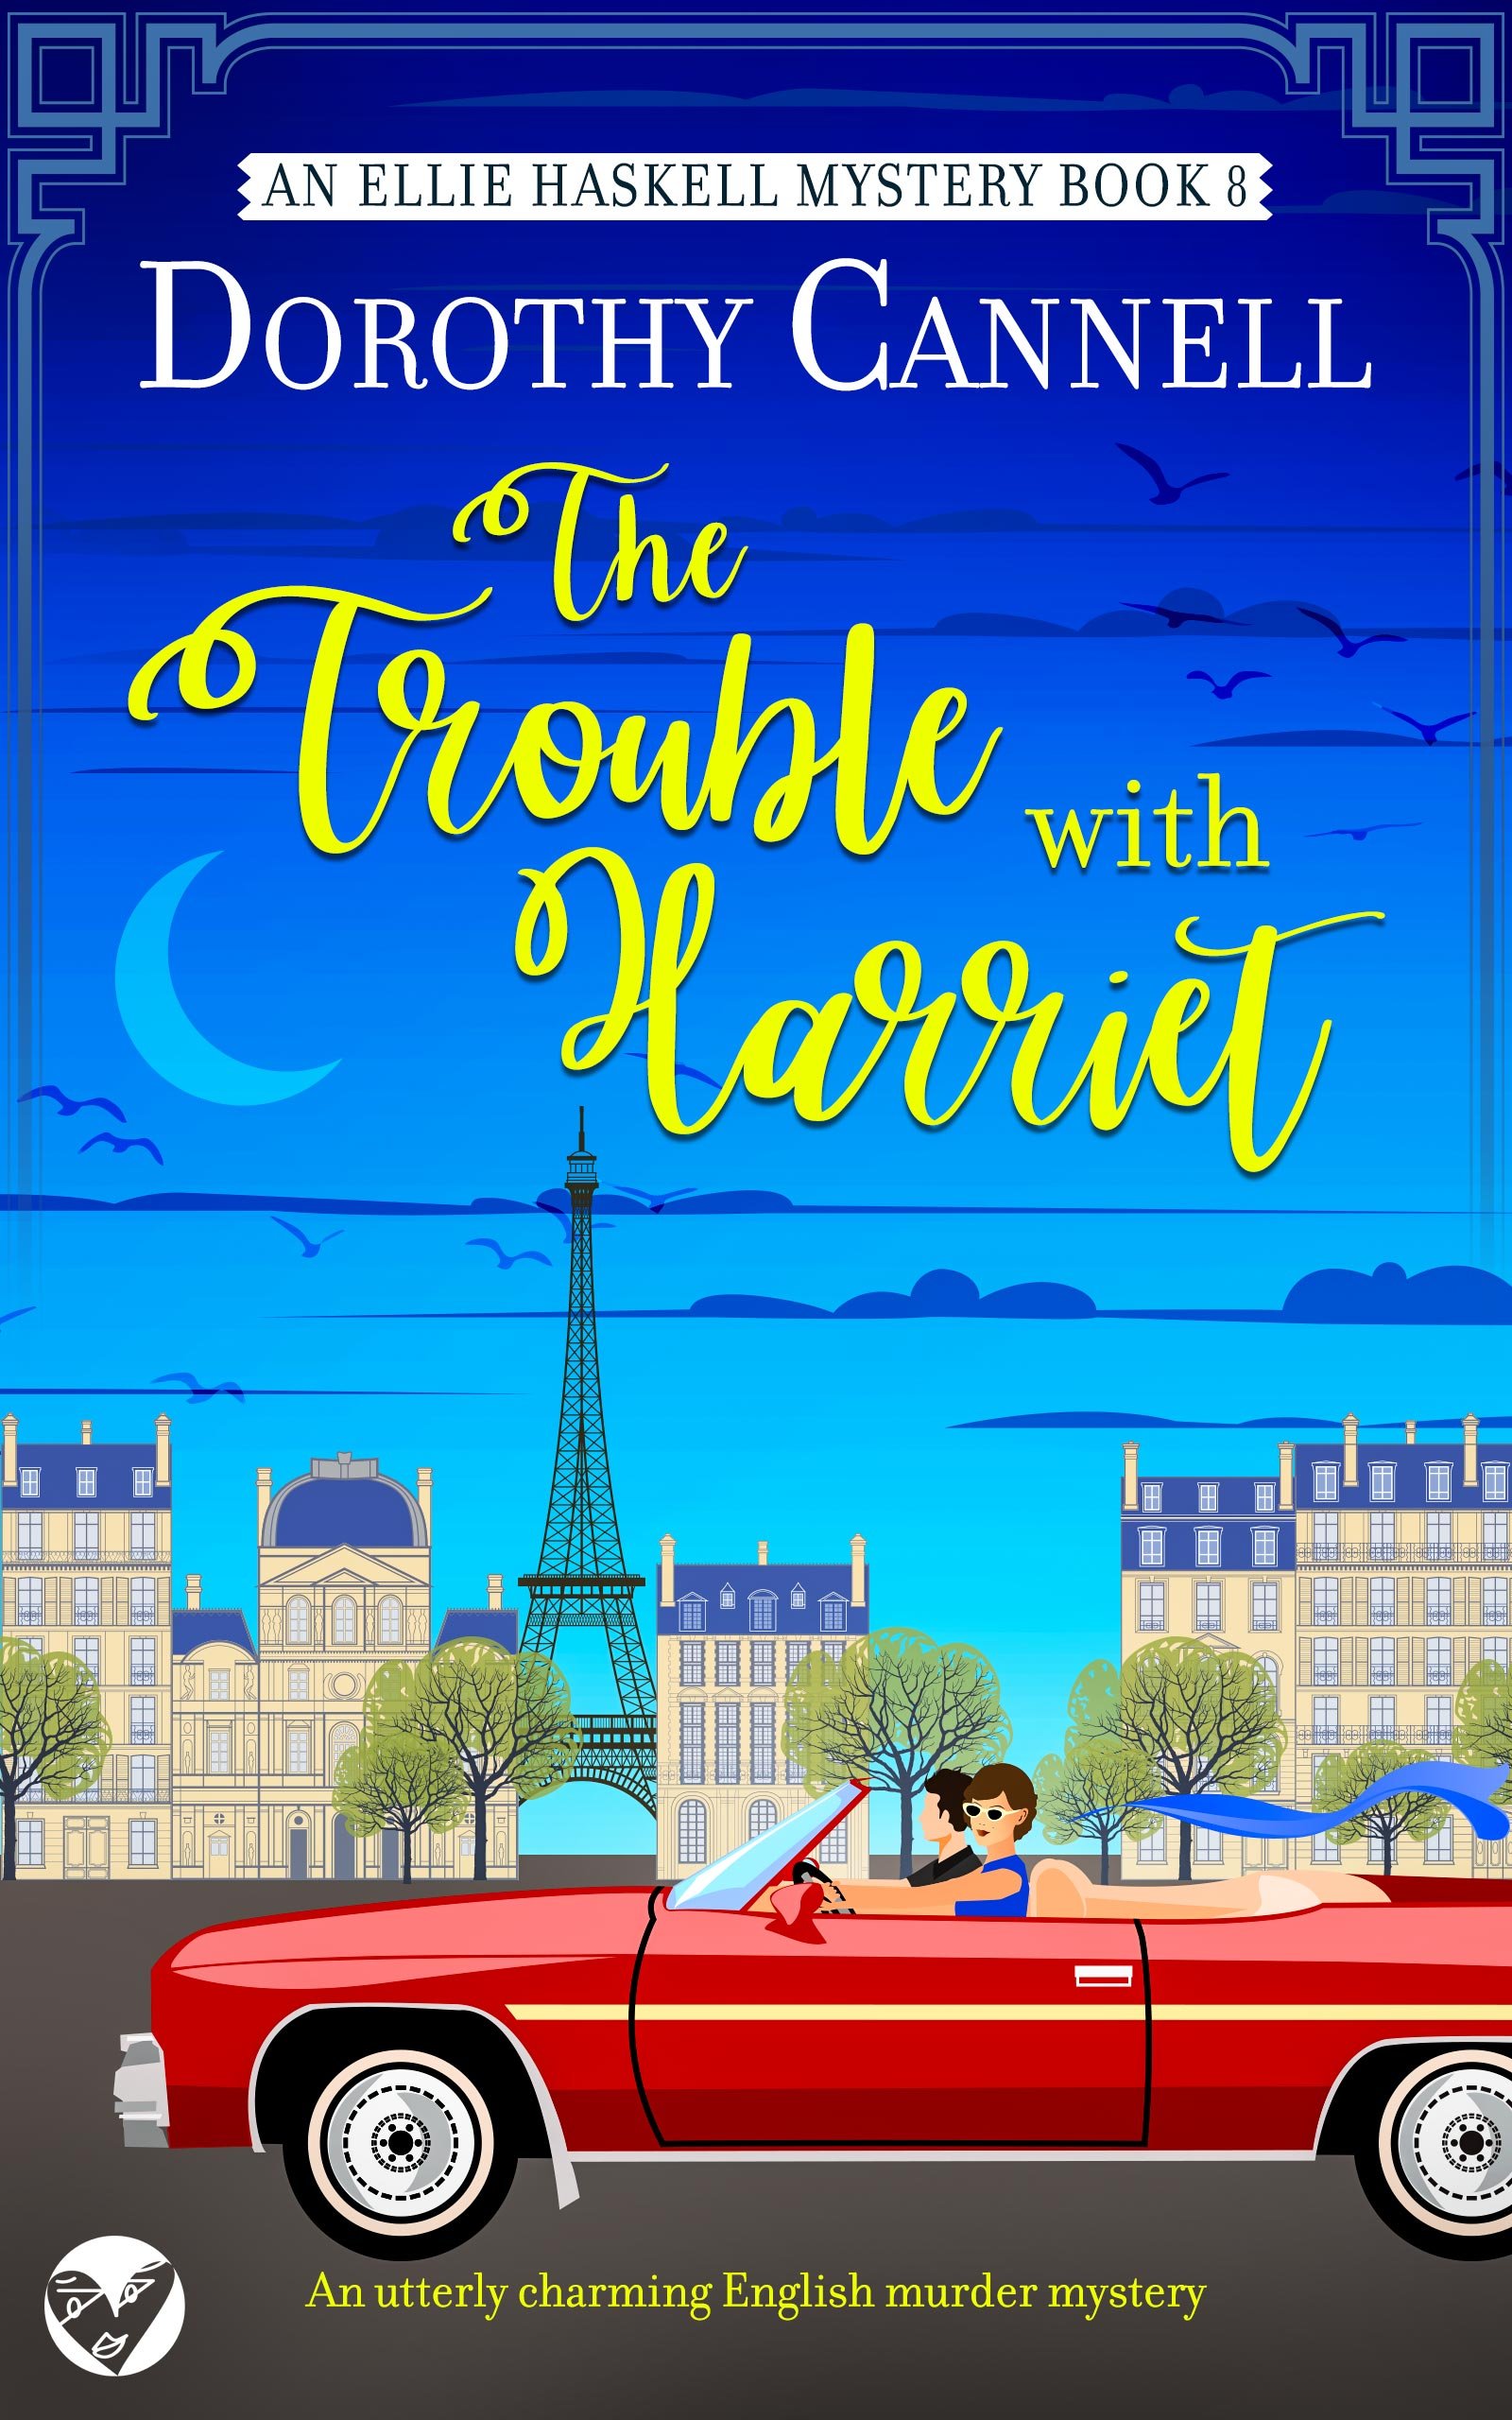 THE TROUBLE WITH HARRIET 529K cover publish.jpg